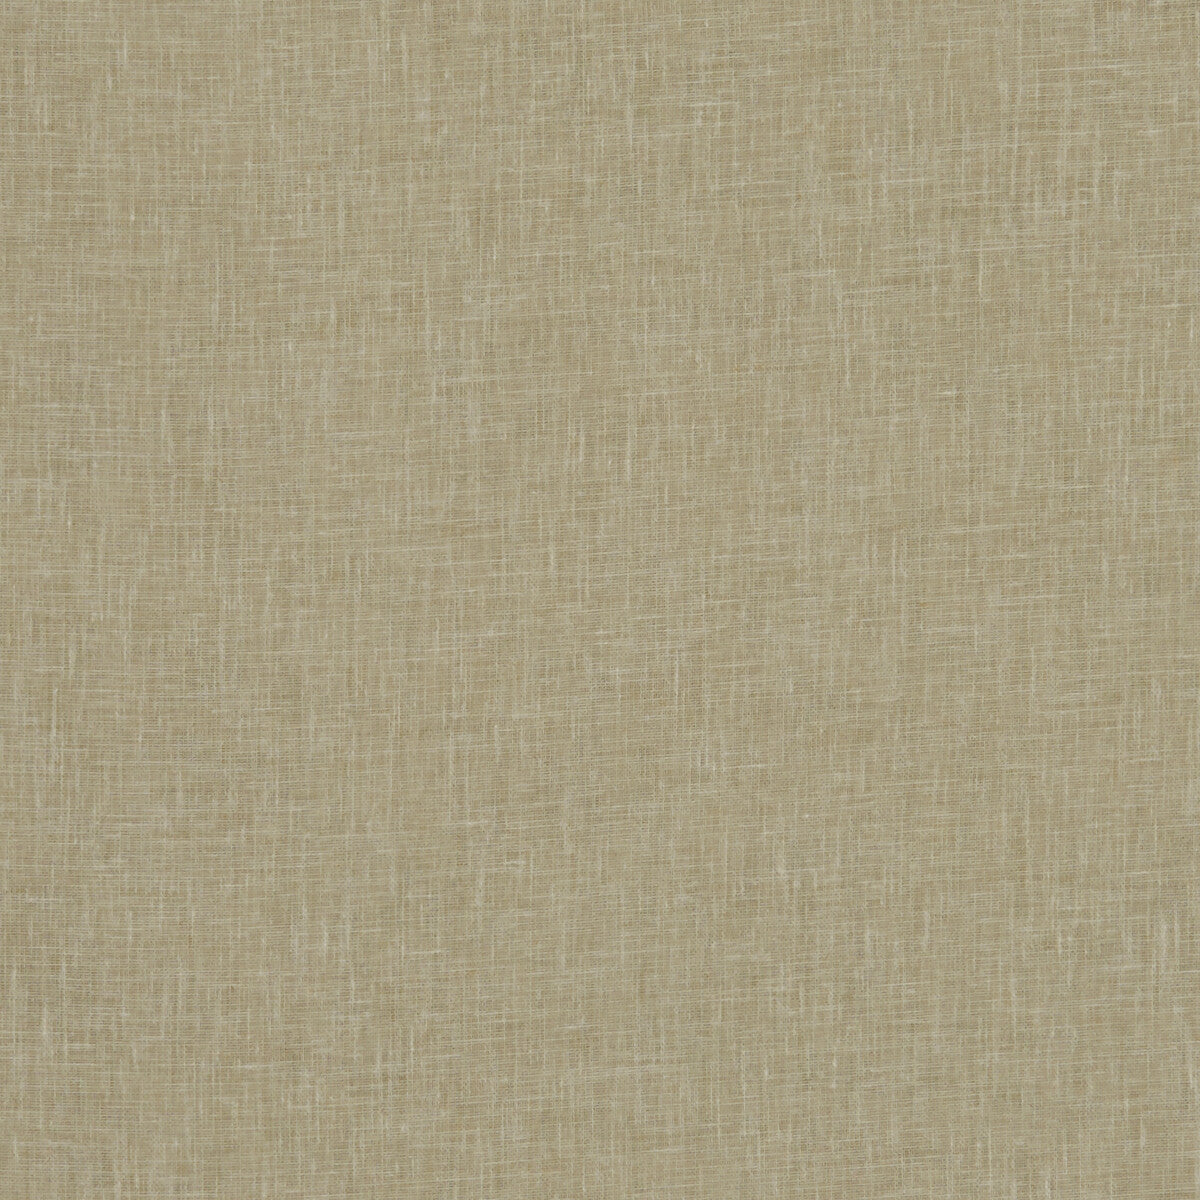 Midori fabric in hazel color - pattern F1068/18.CAC.0 - by Clarke And Clarke in the Clarke &amp; Clarke Midori collection